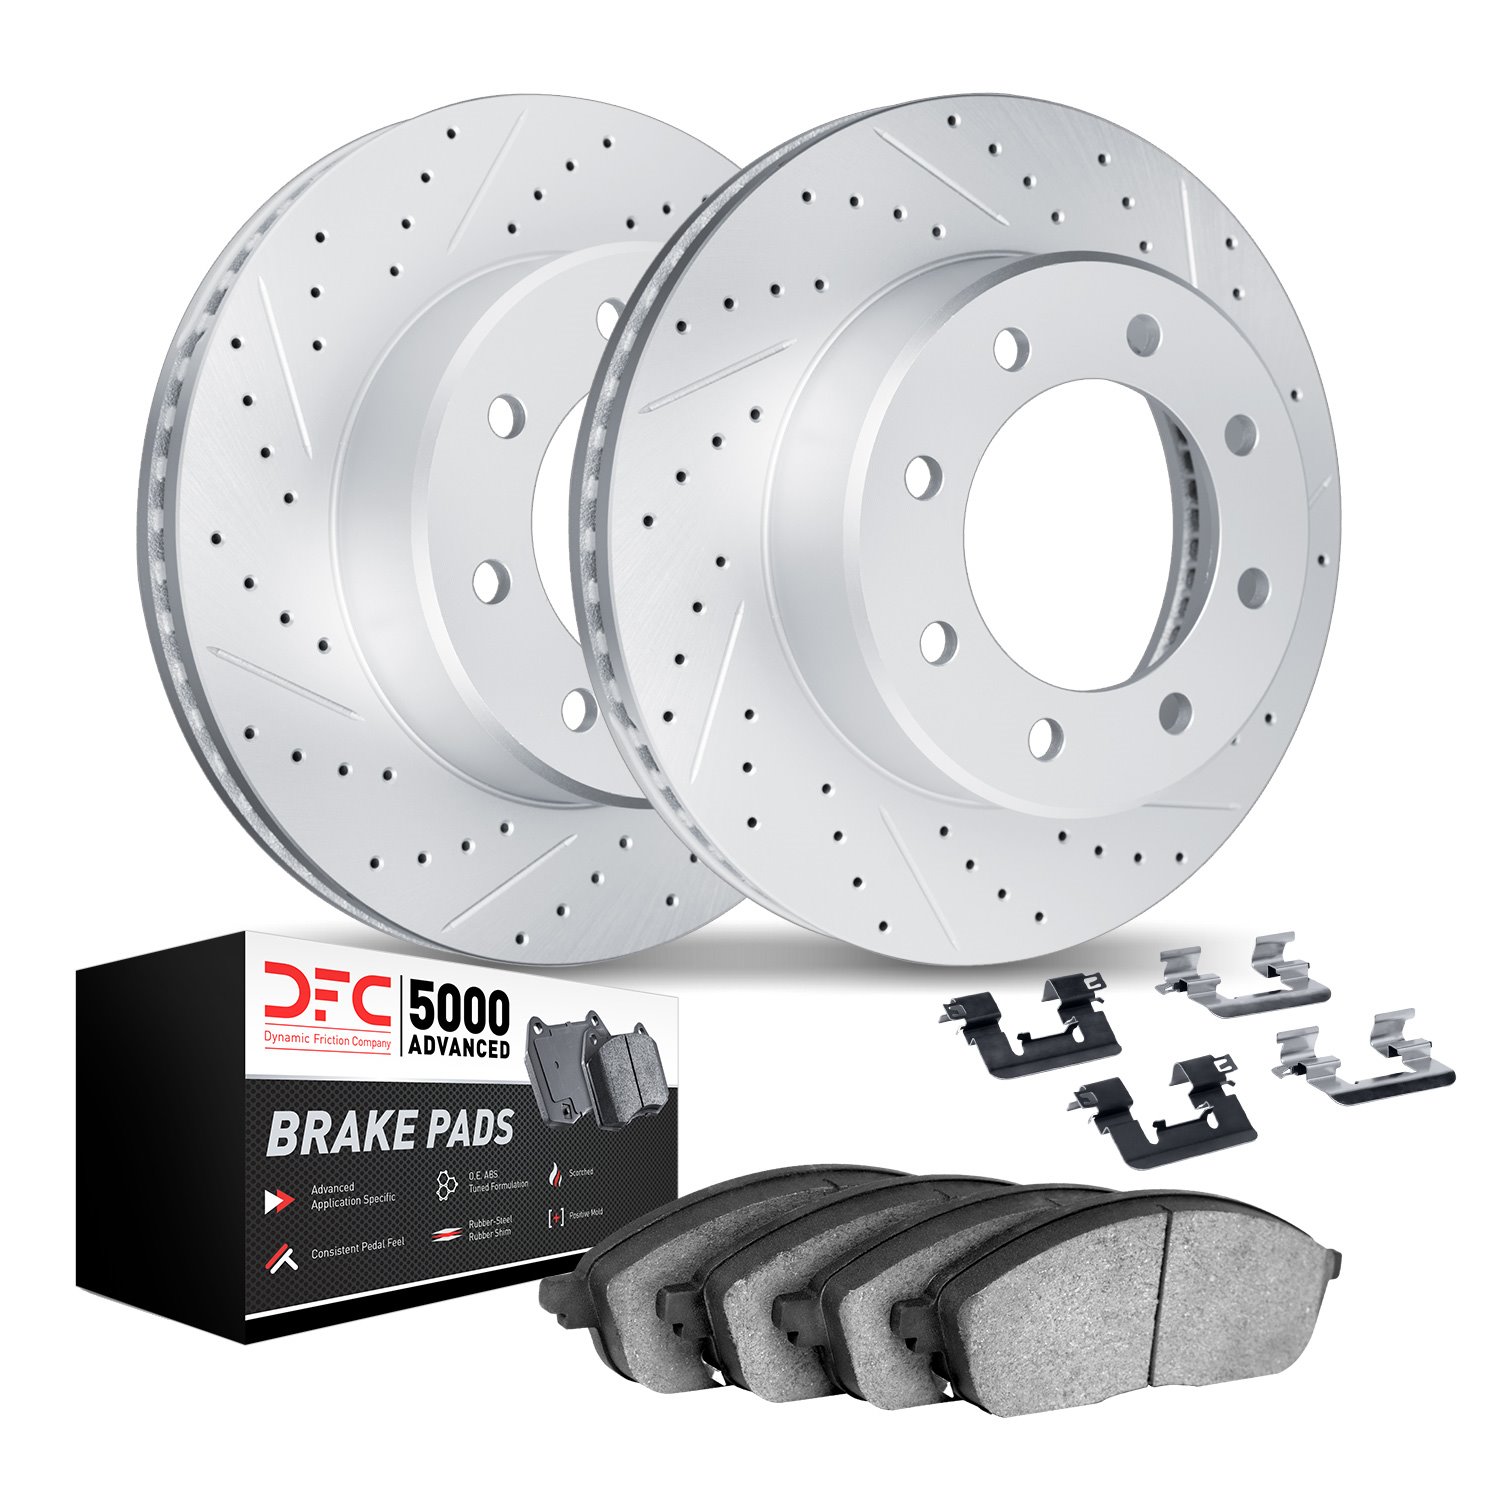 2512-54575 Geoperformance Drilled/Slotted Rotors w/5000 Advanced Brake Pads Kit & Hardware, Fits Select Ford/Lincoln/Mercury/Maz